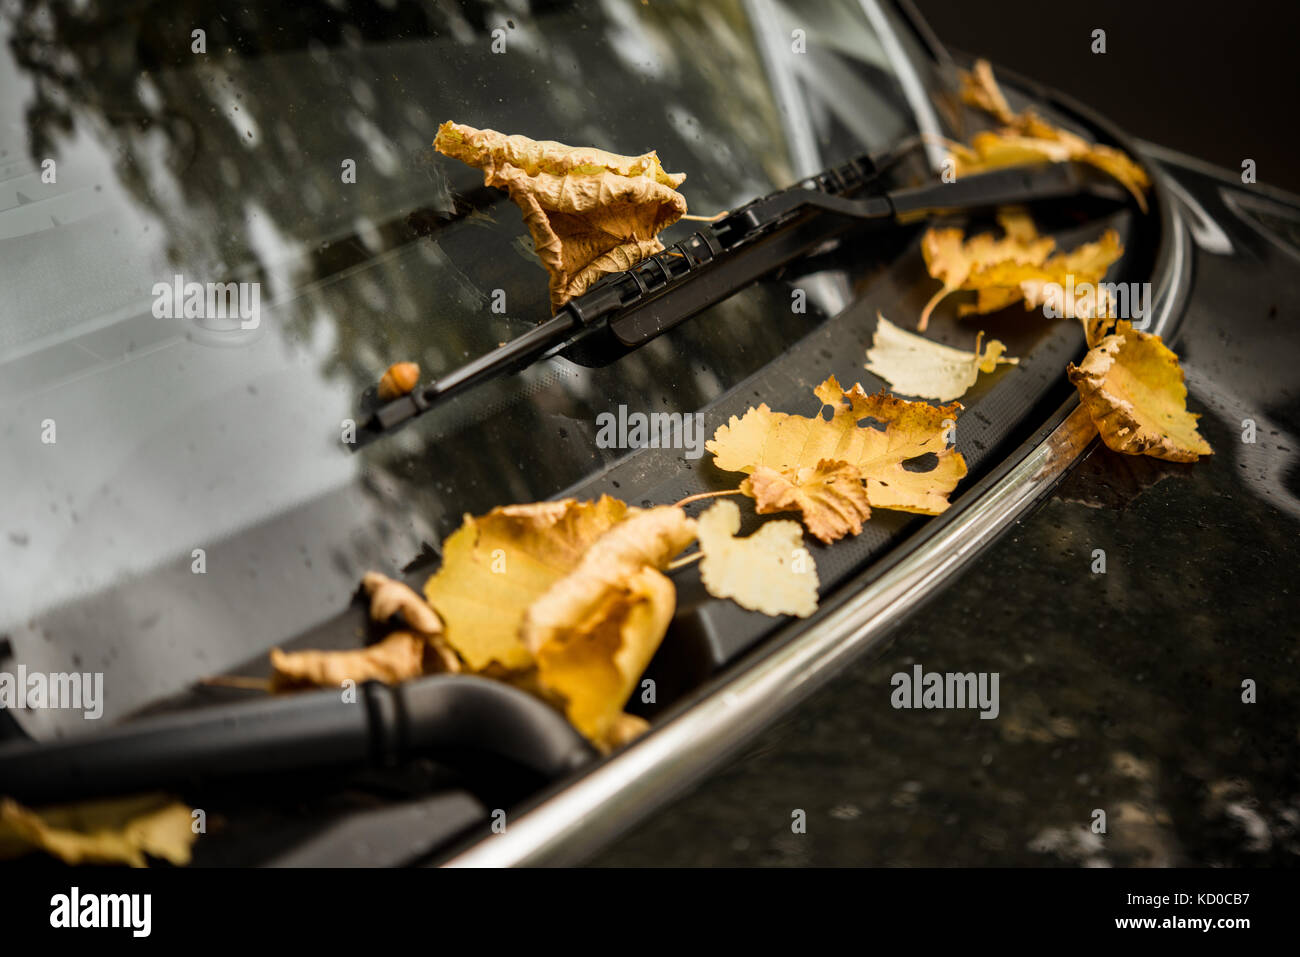 Wiper of a black car with orange leaves in autumn Stock Photo